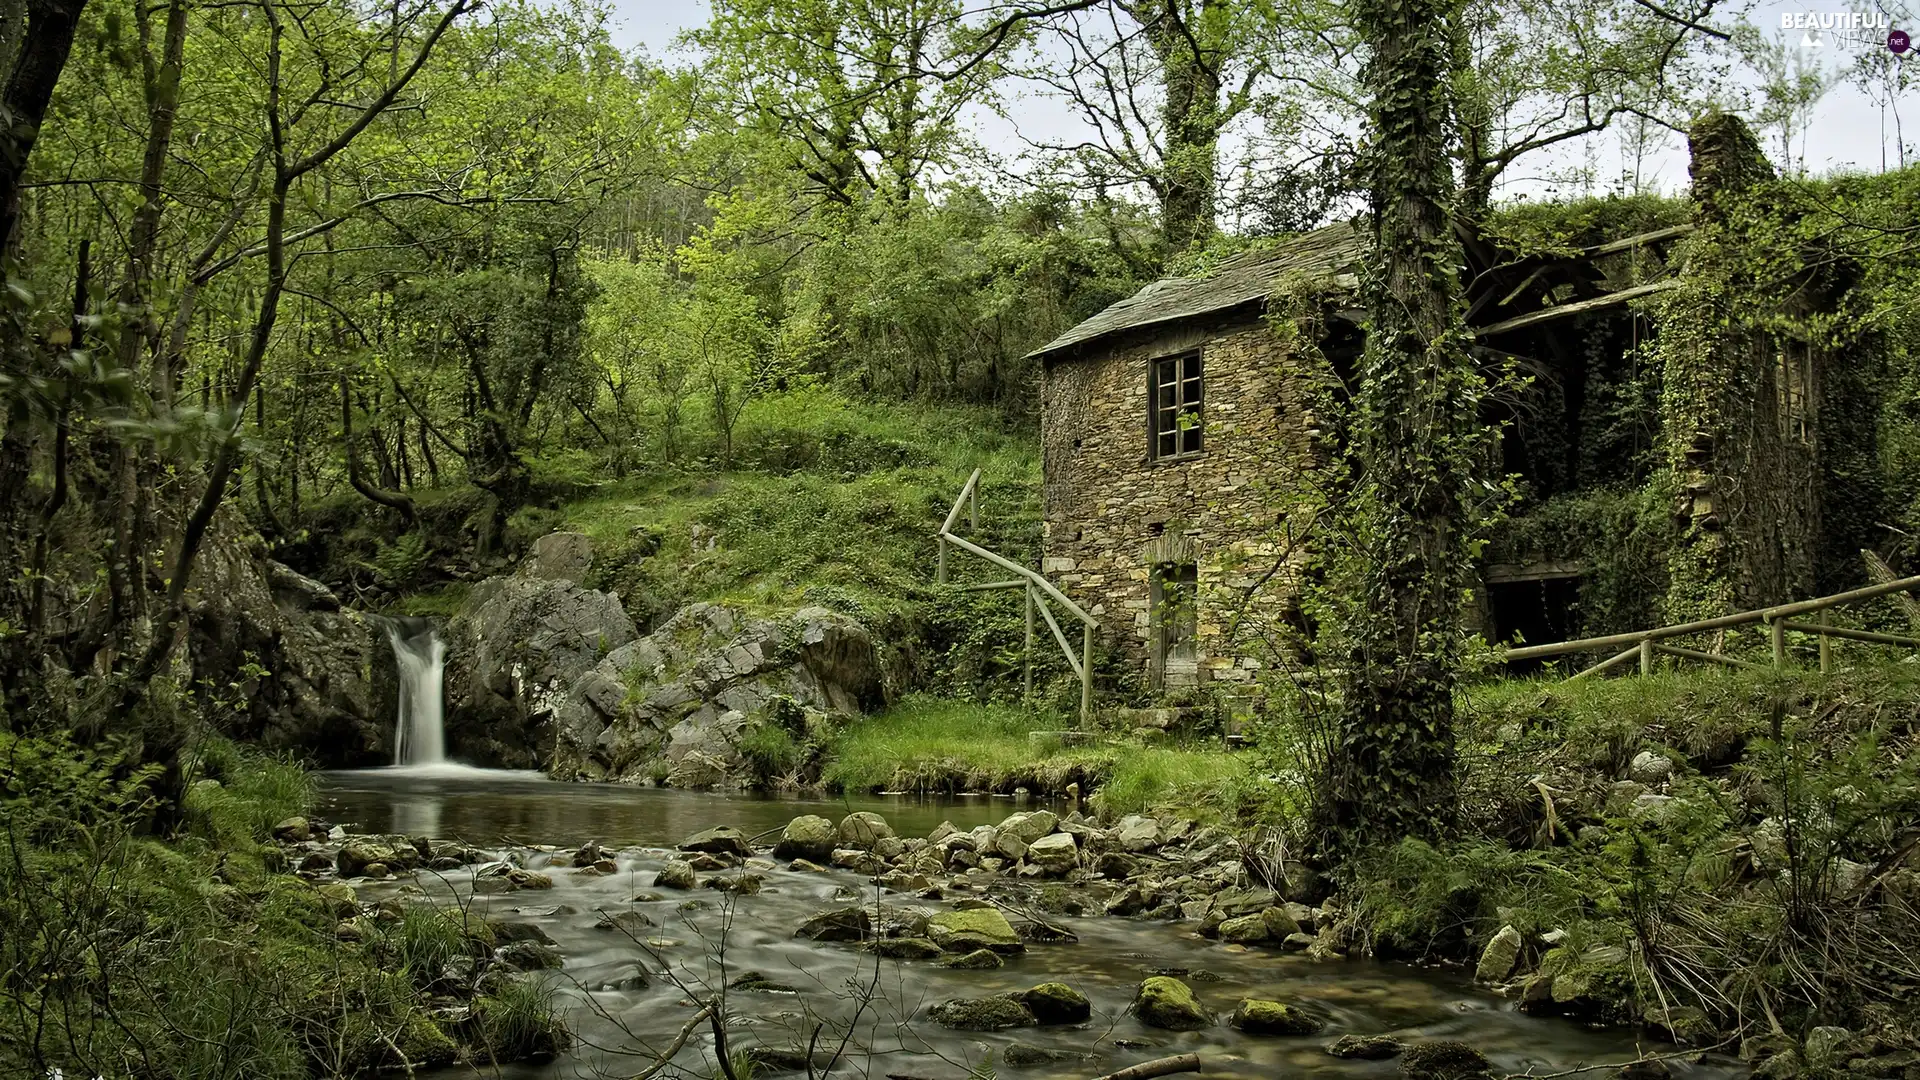 waterfall, House, Stones, River, forest